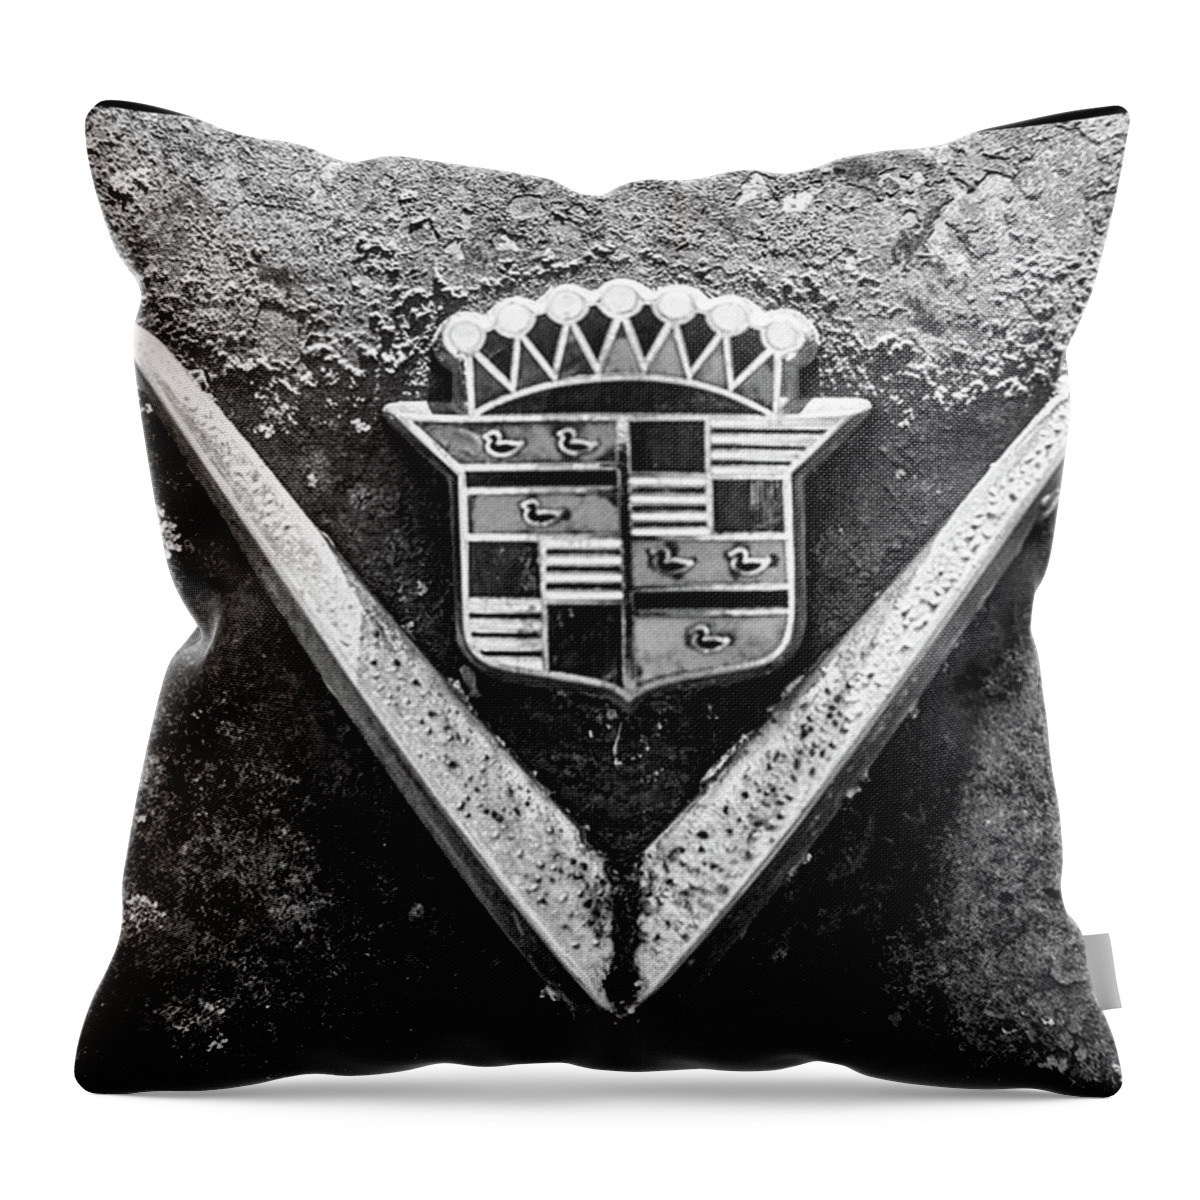 Rusted Throw Pillow featuring the photograph Cadillac Emblem by Matthew Pace